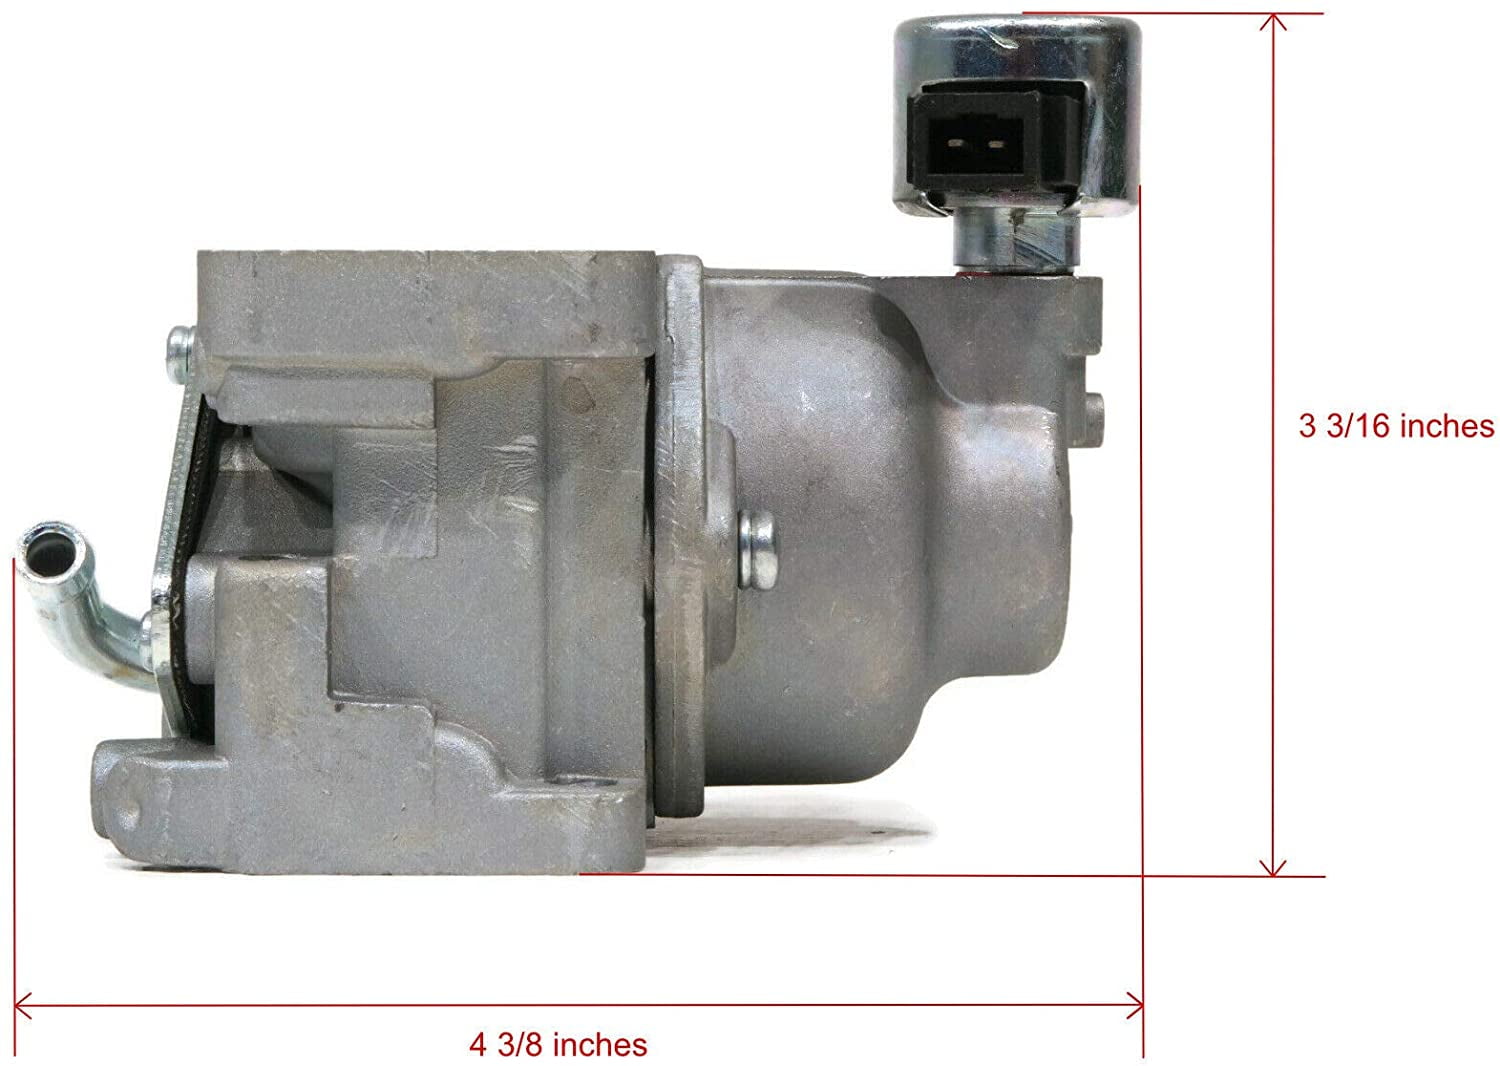 KM150037121 Lawn Mowers Details about   Carburetor Assembly for Kawasaki Engines KM-15003-7121 